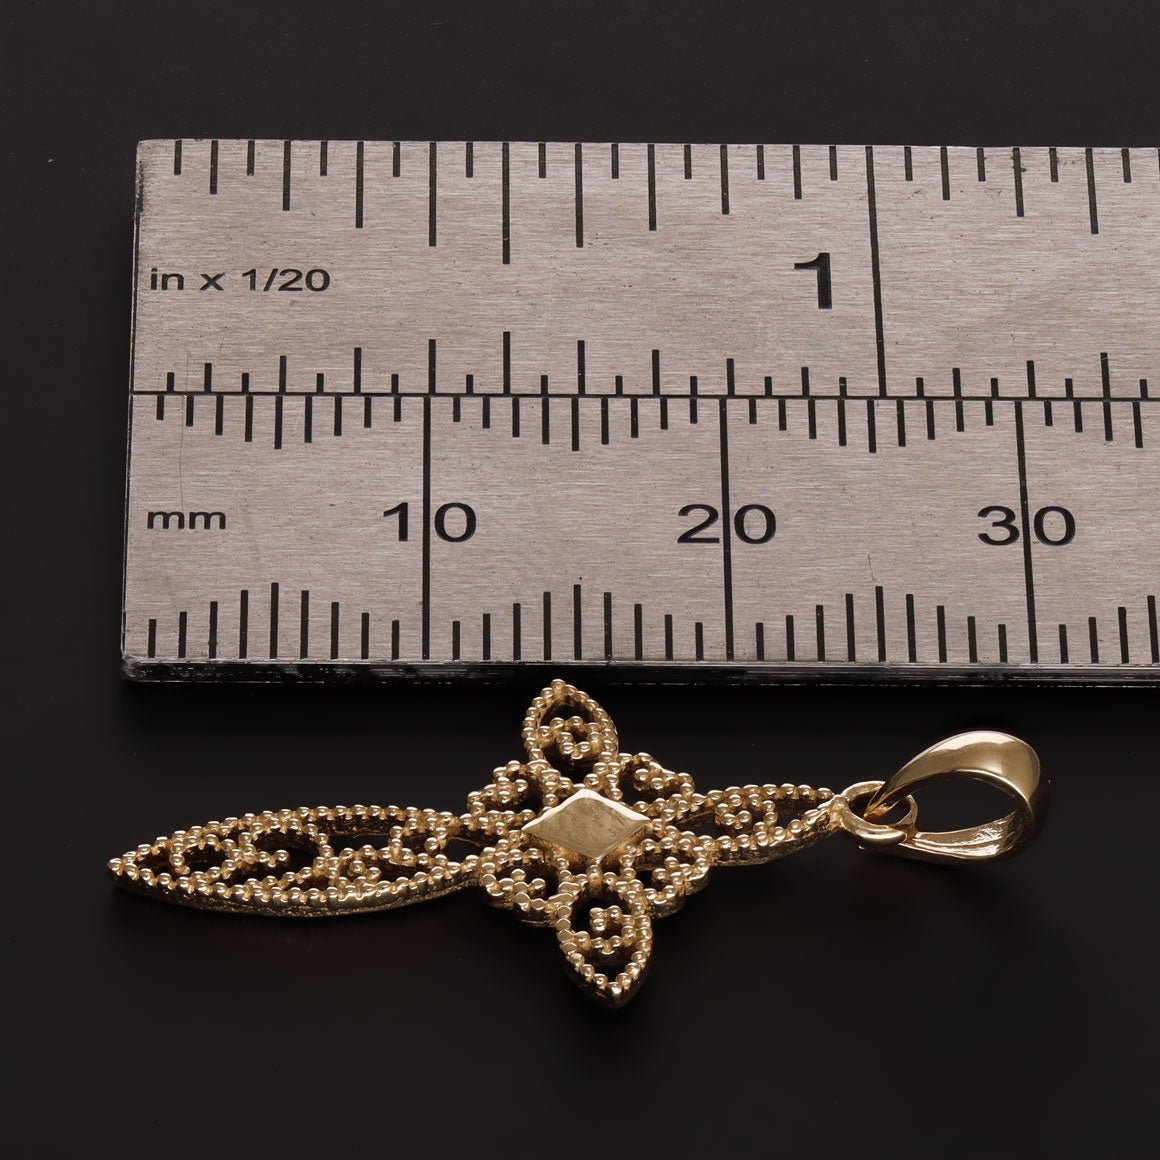 9ct Gold Unique Patterned Cross Pendant - 31mm - FJewellery